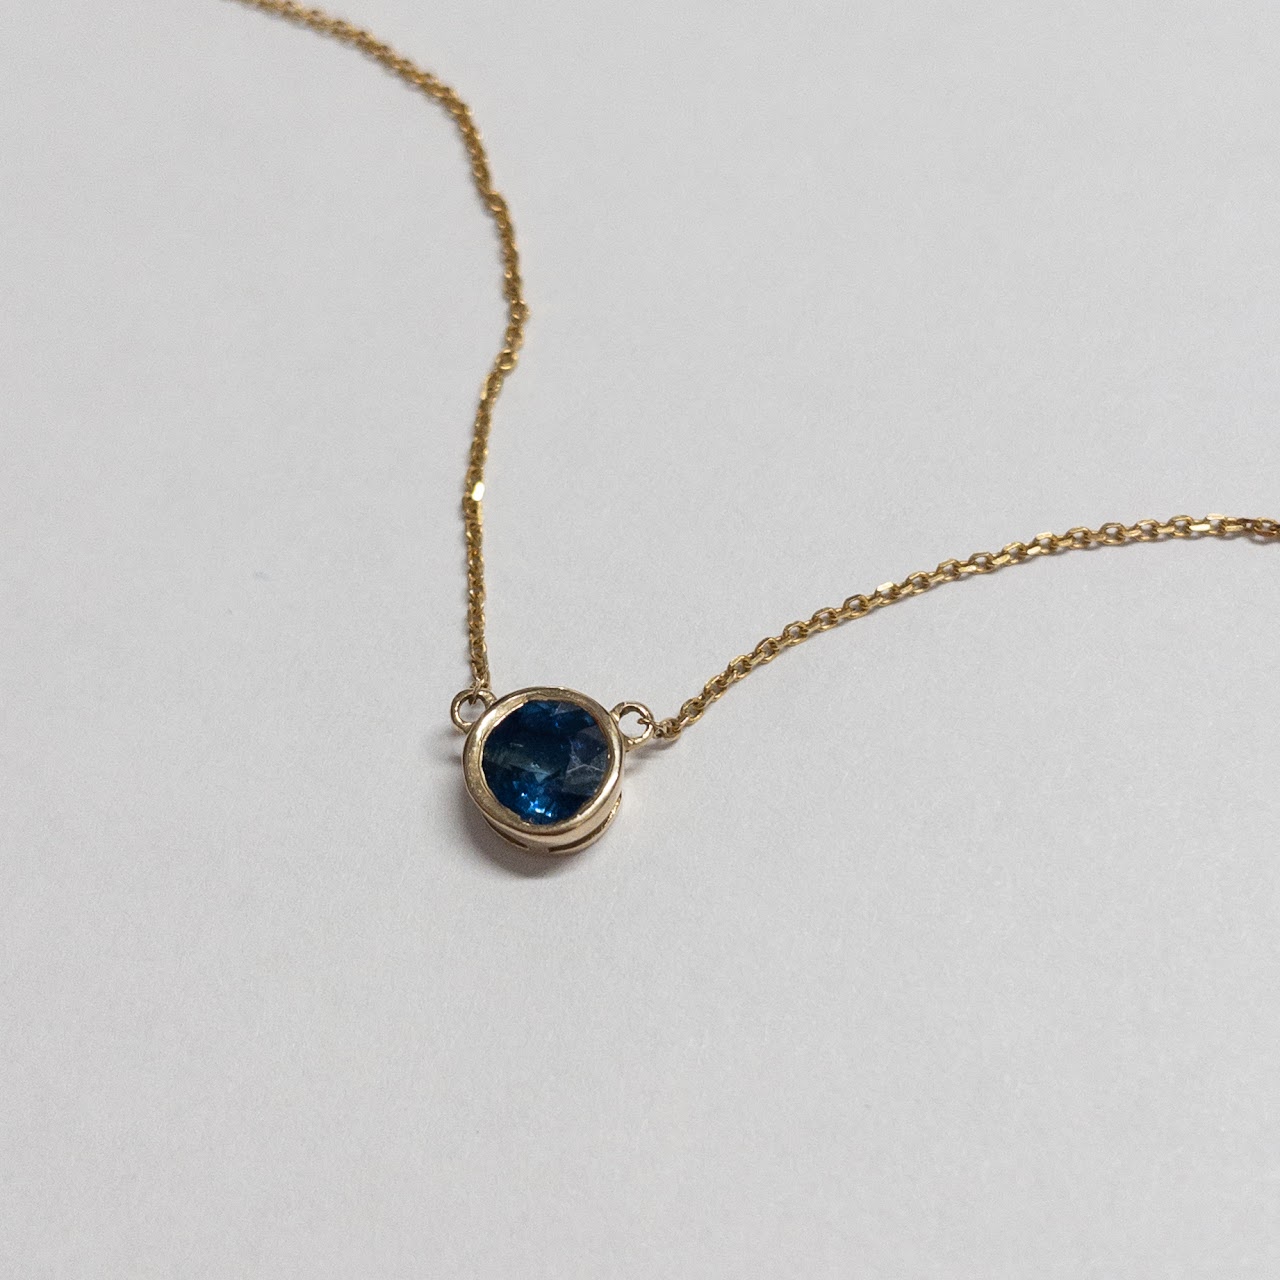 14K Gold and Blue Stone Pendant Necklace